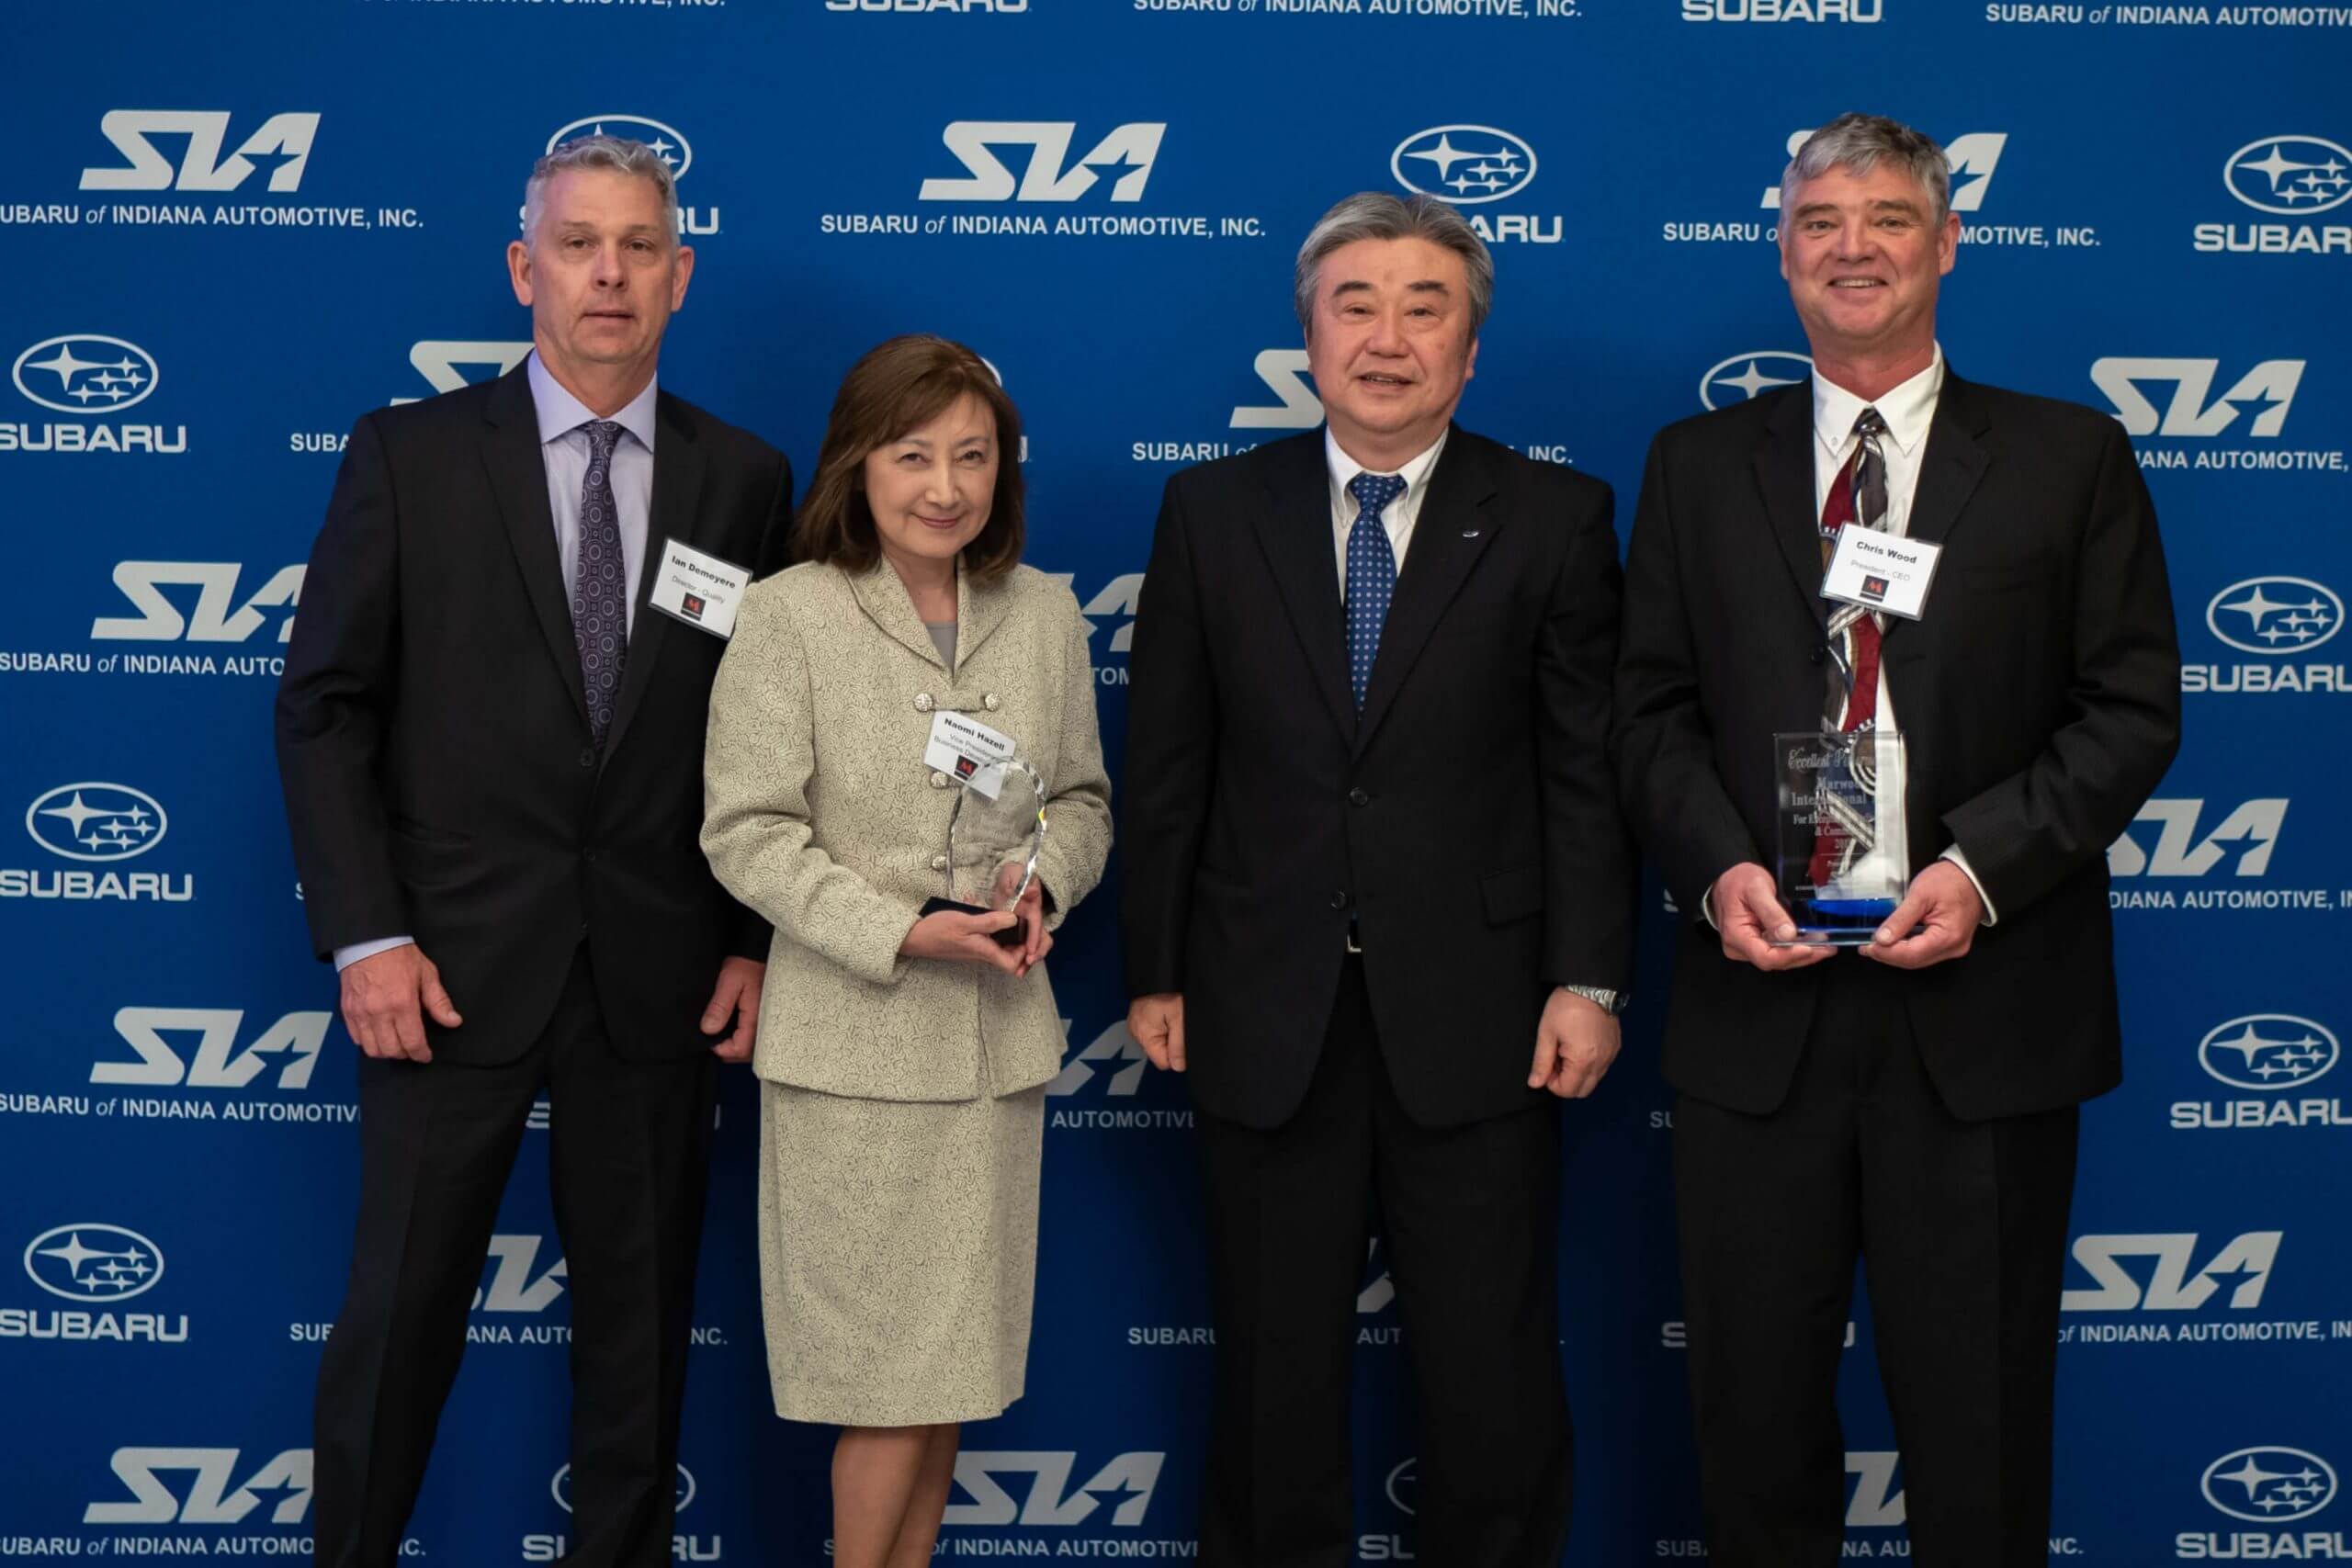 A Image of Chris Wood our CEO receiving A award for Marwood from Subaru